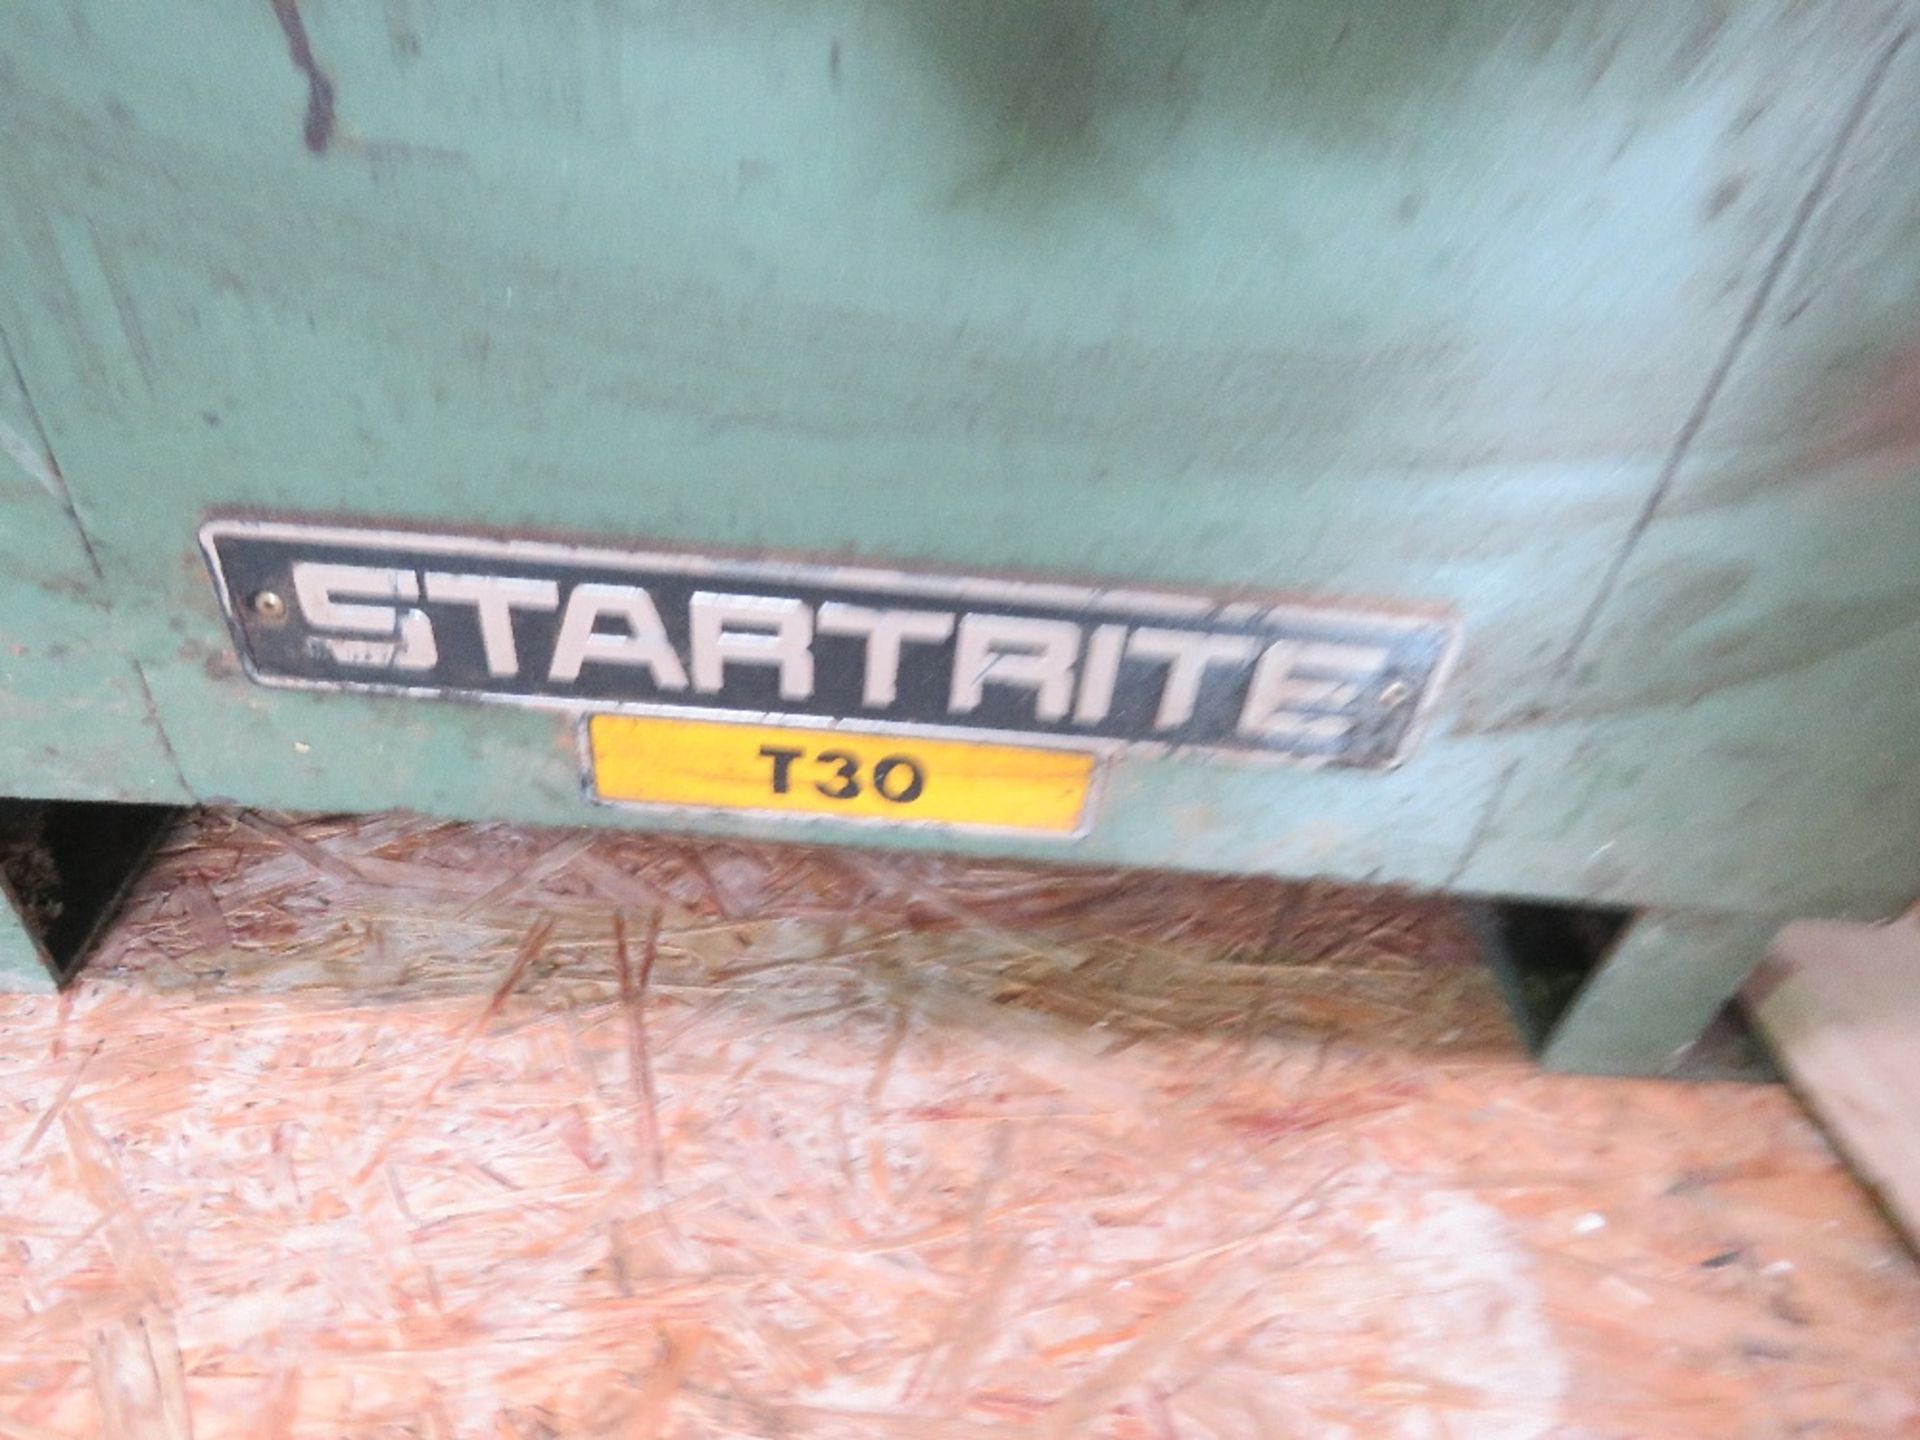 STARTRITE T30 SPINDLE MOULDER UNIT WITH 240VOLT POWERED FEED HEAD, MAIN UNIT IS 3 PHASE POWERED..... - Image 5 of 5